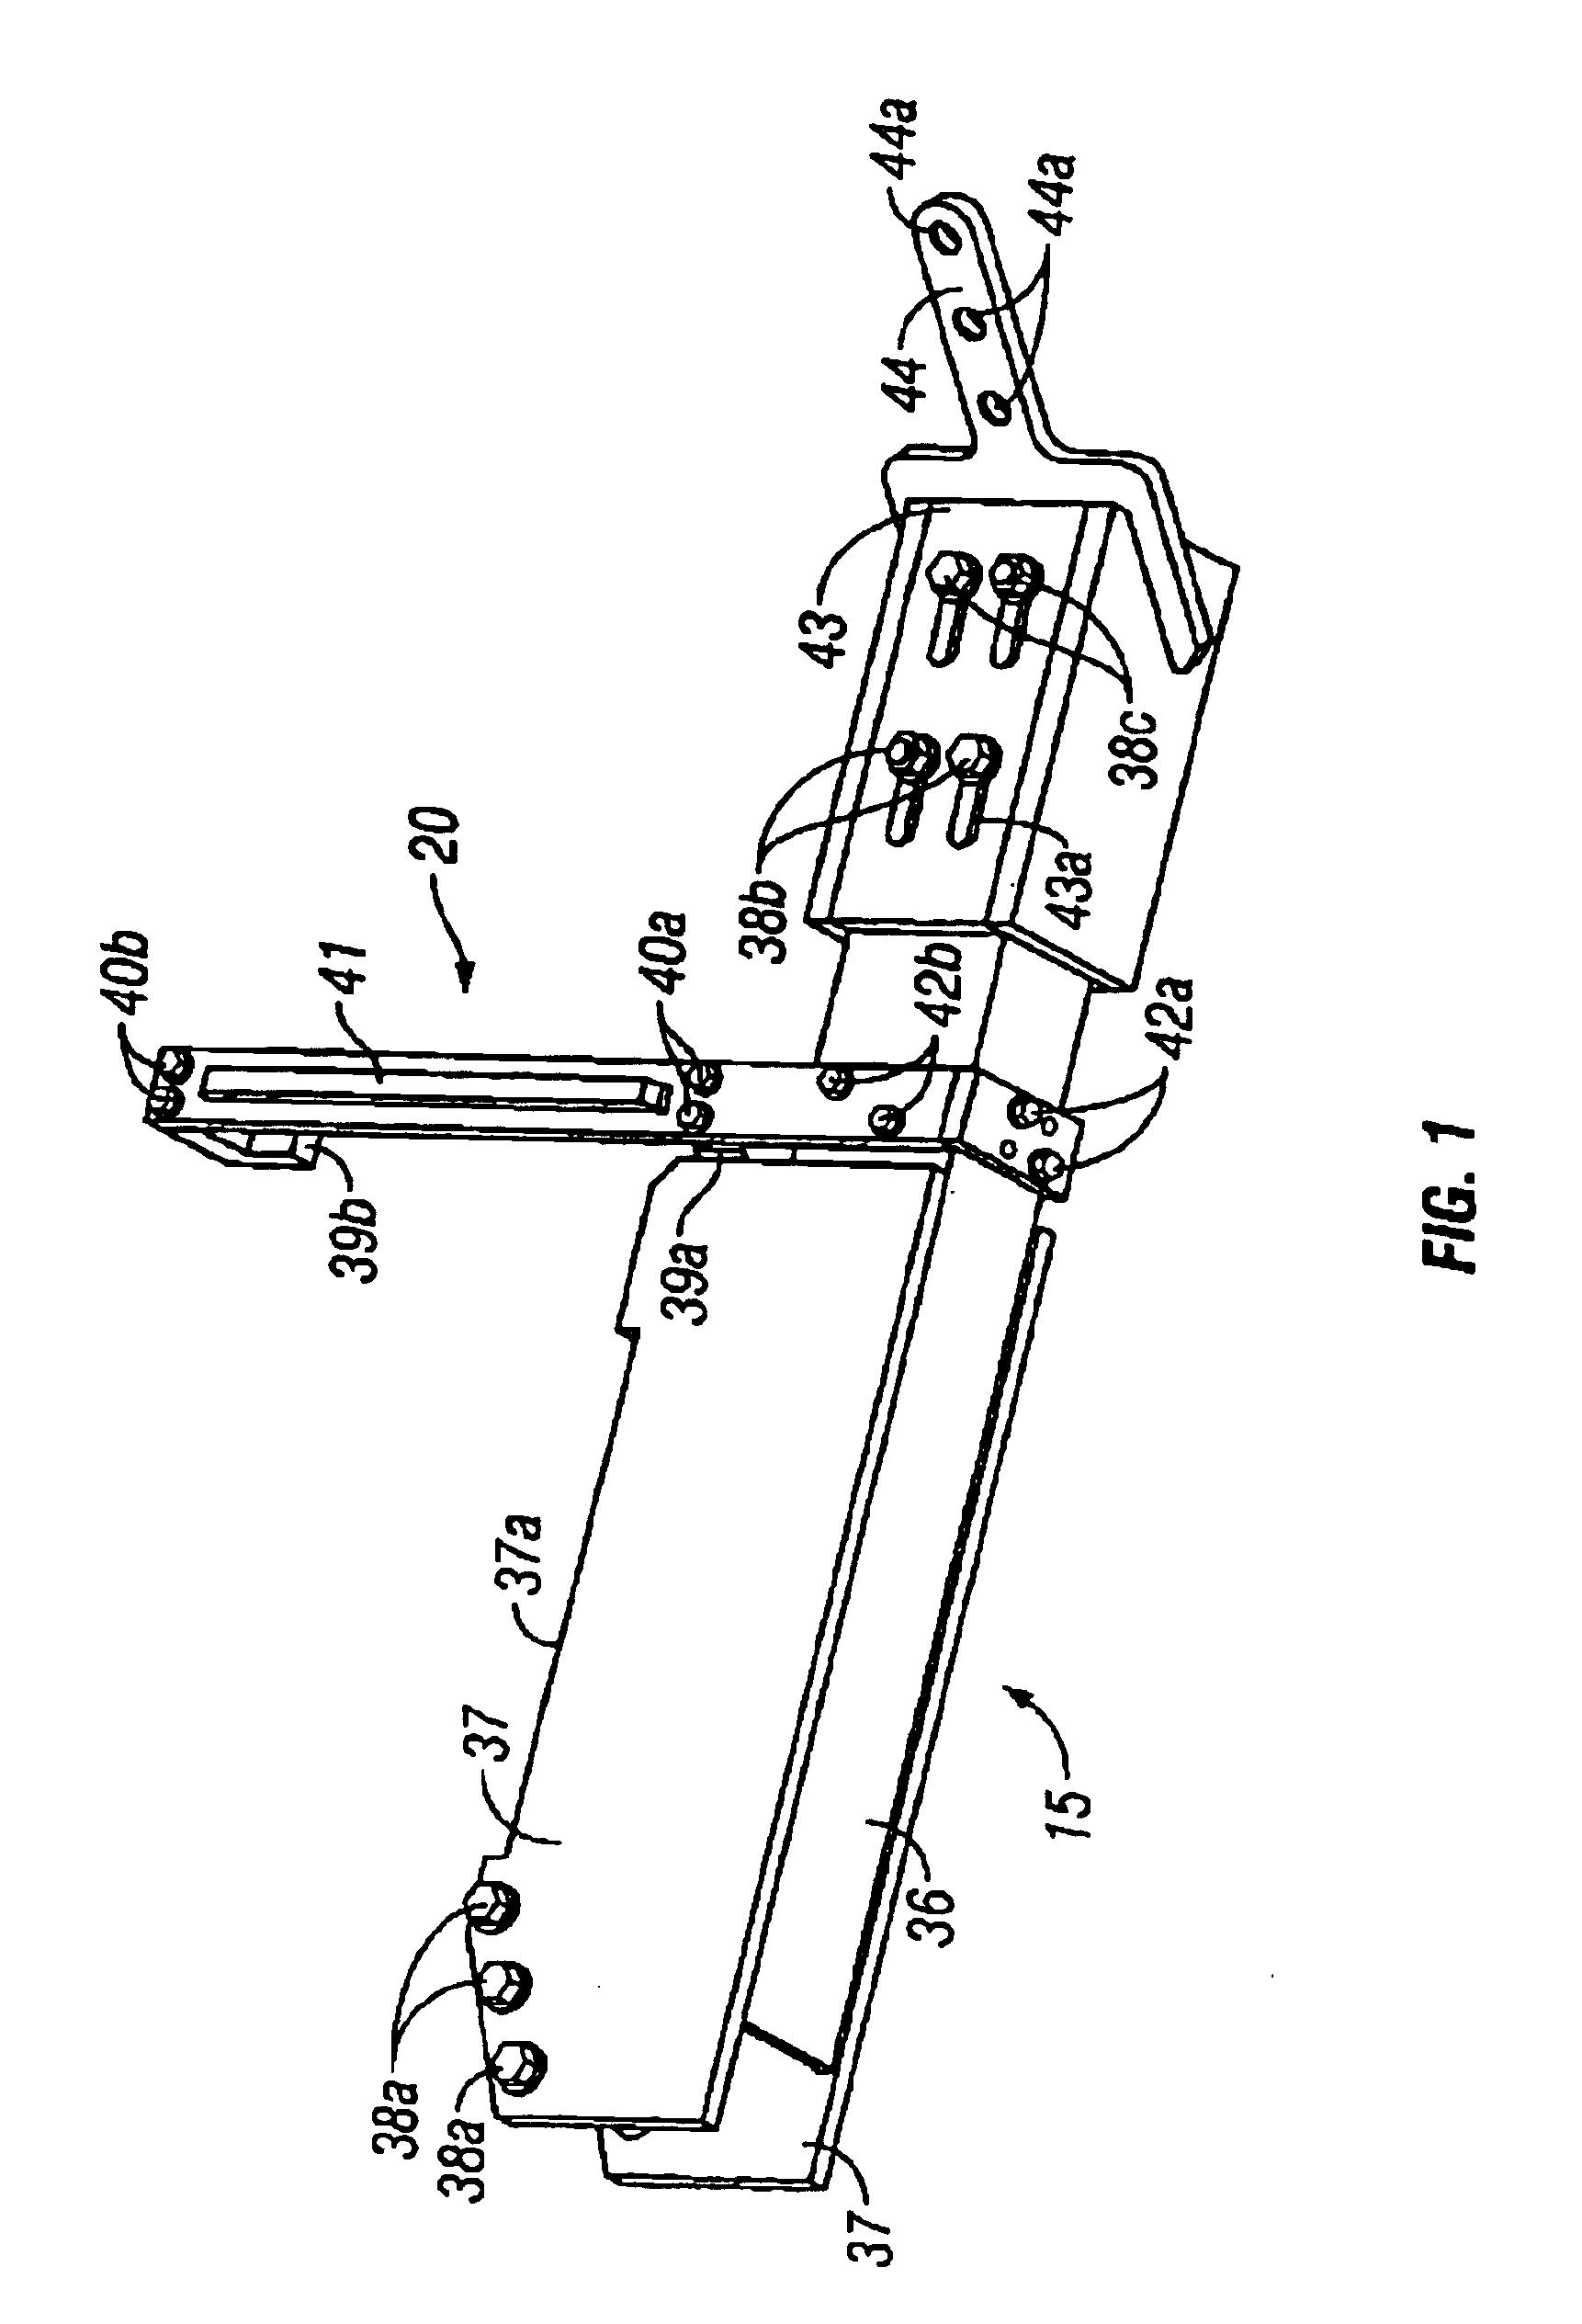 Universal top-drive wireline entry system bracket and method